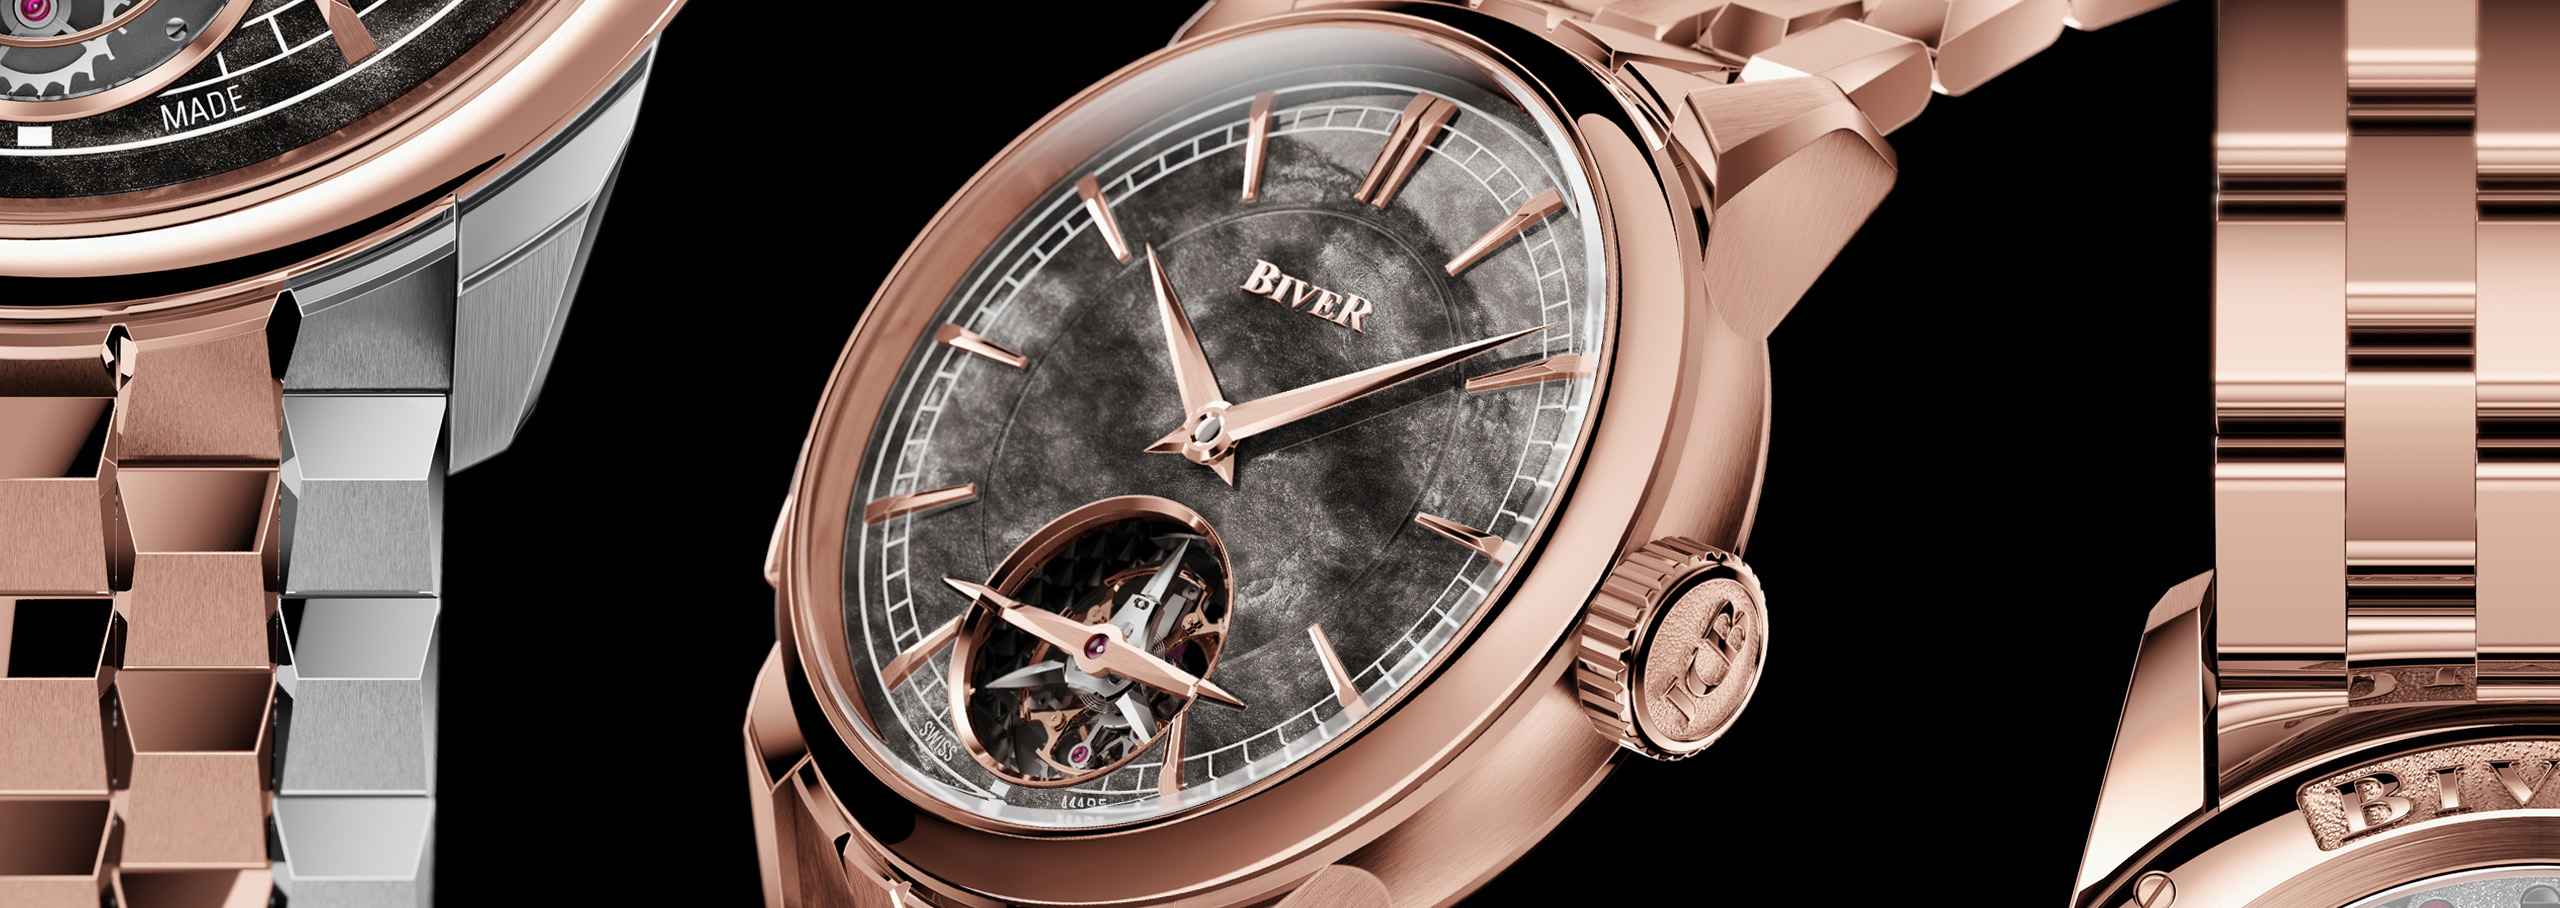 Jean-Claude Biver on why luxury watches are about the experience